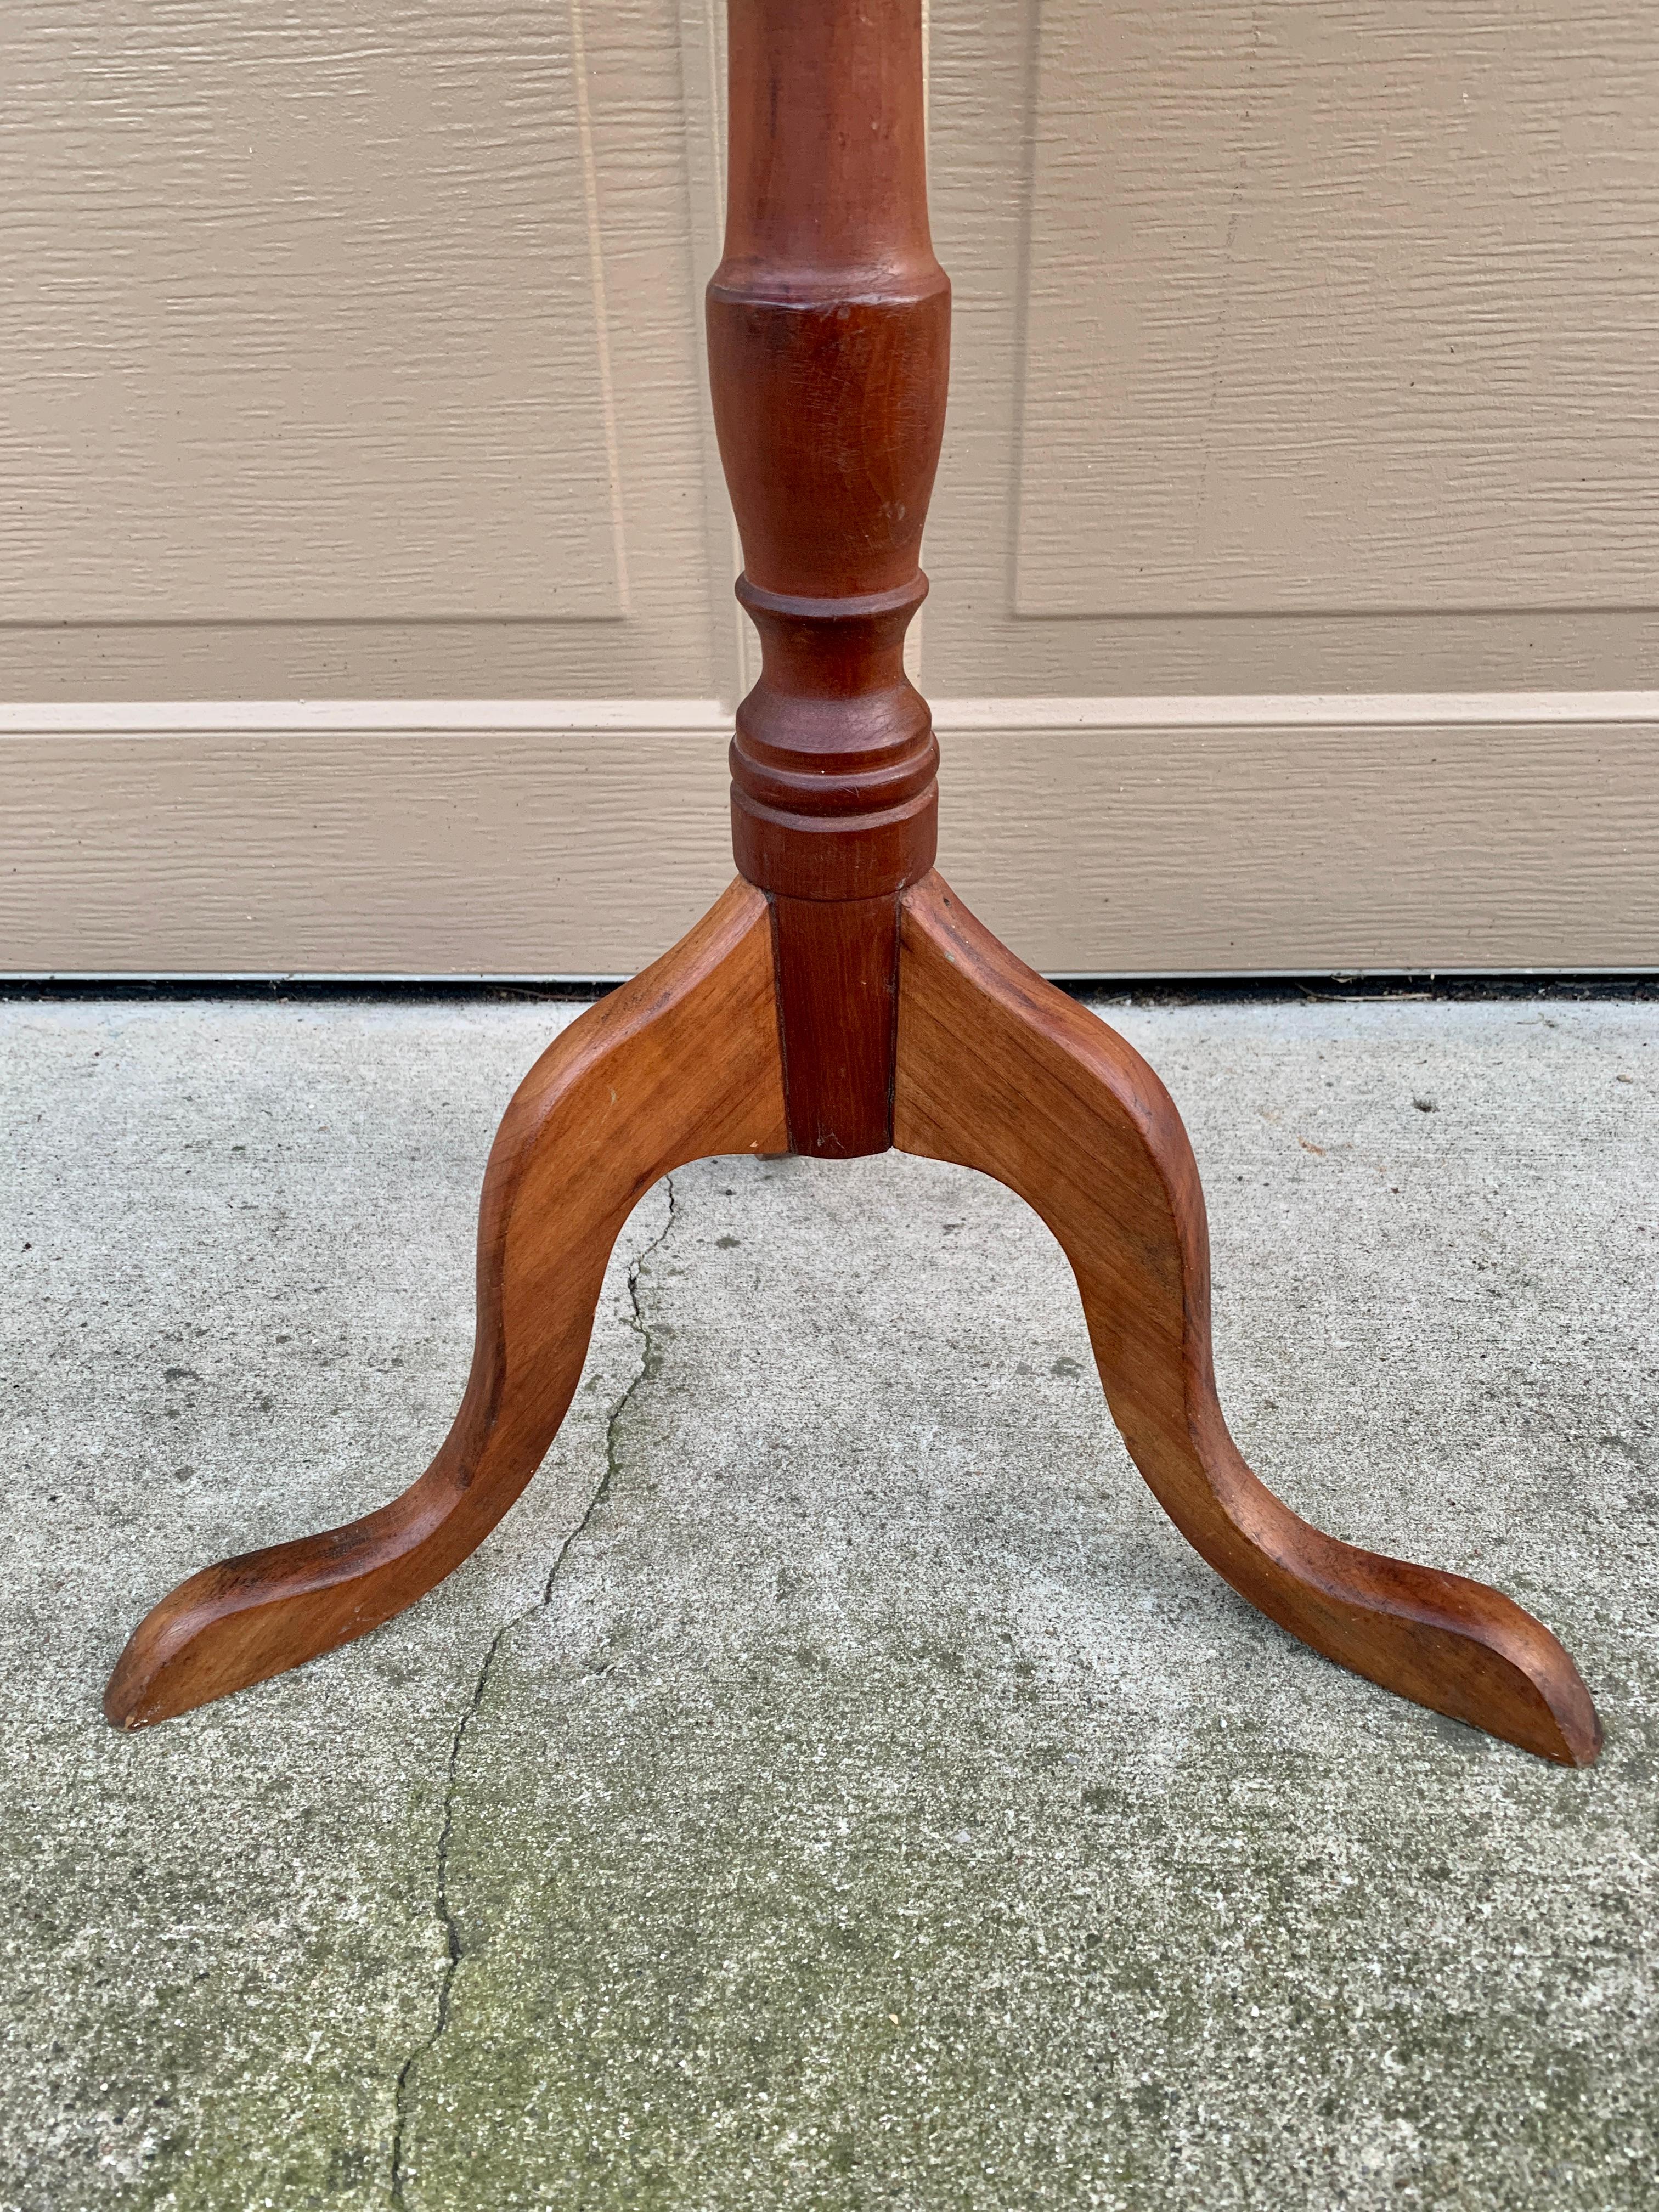 Antique American Colonial Cherry Candle Stand or Side Table, Mid 19th Century For Sale 4